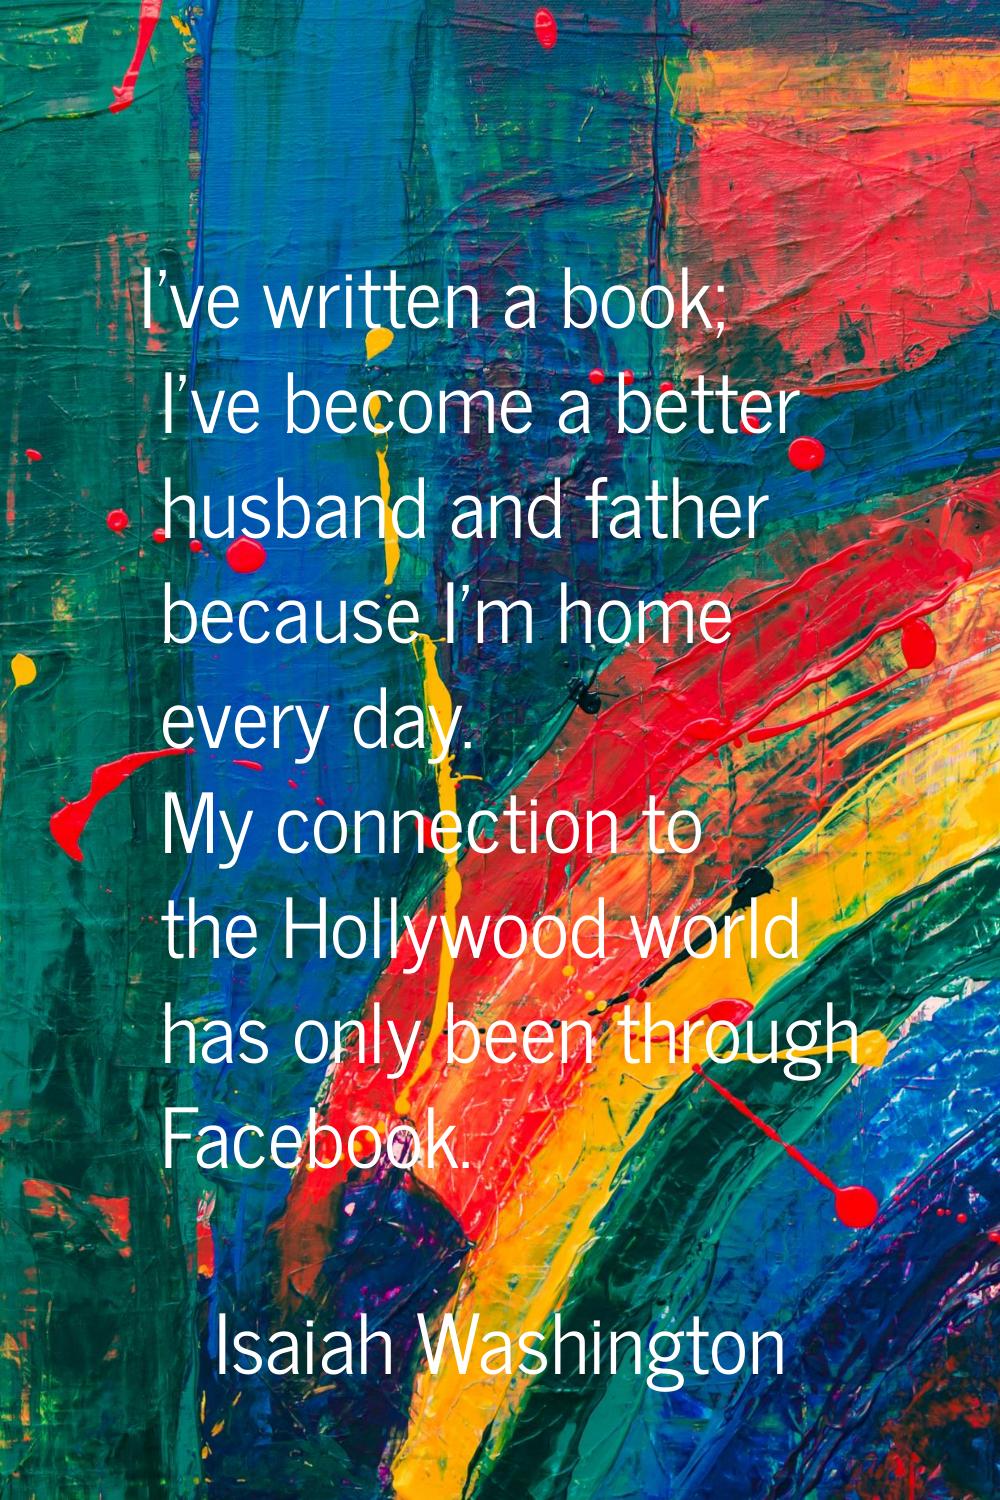 I've written a book; I've become a better husband and father because I'm home every day. My connect